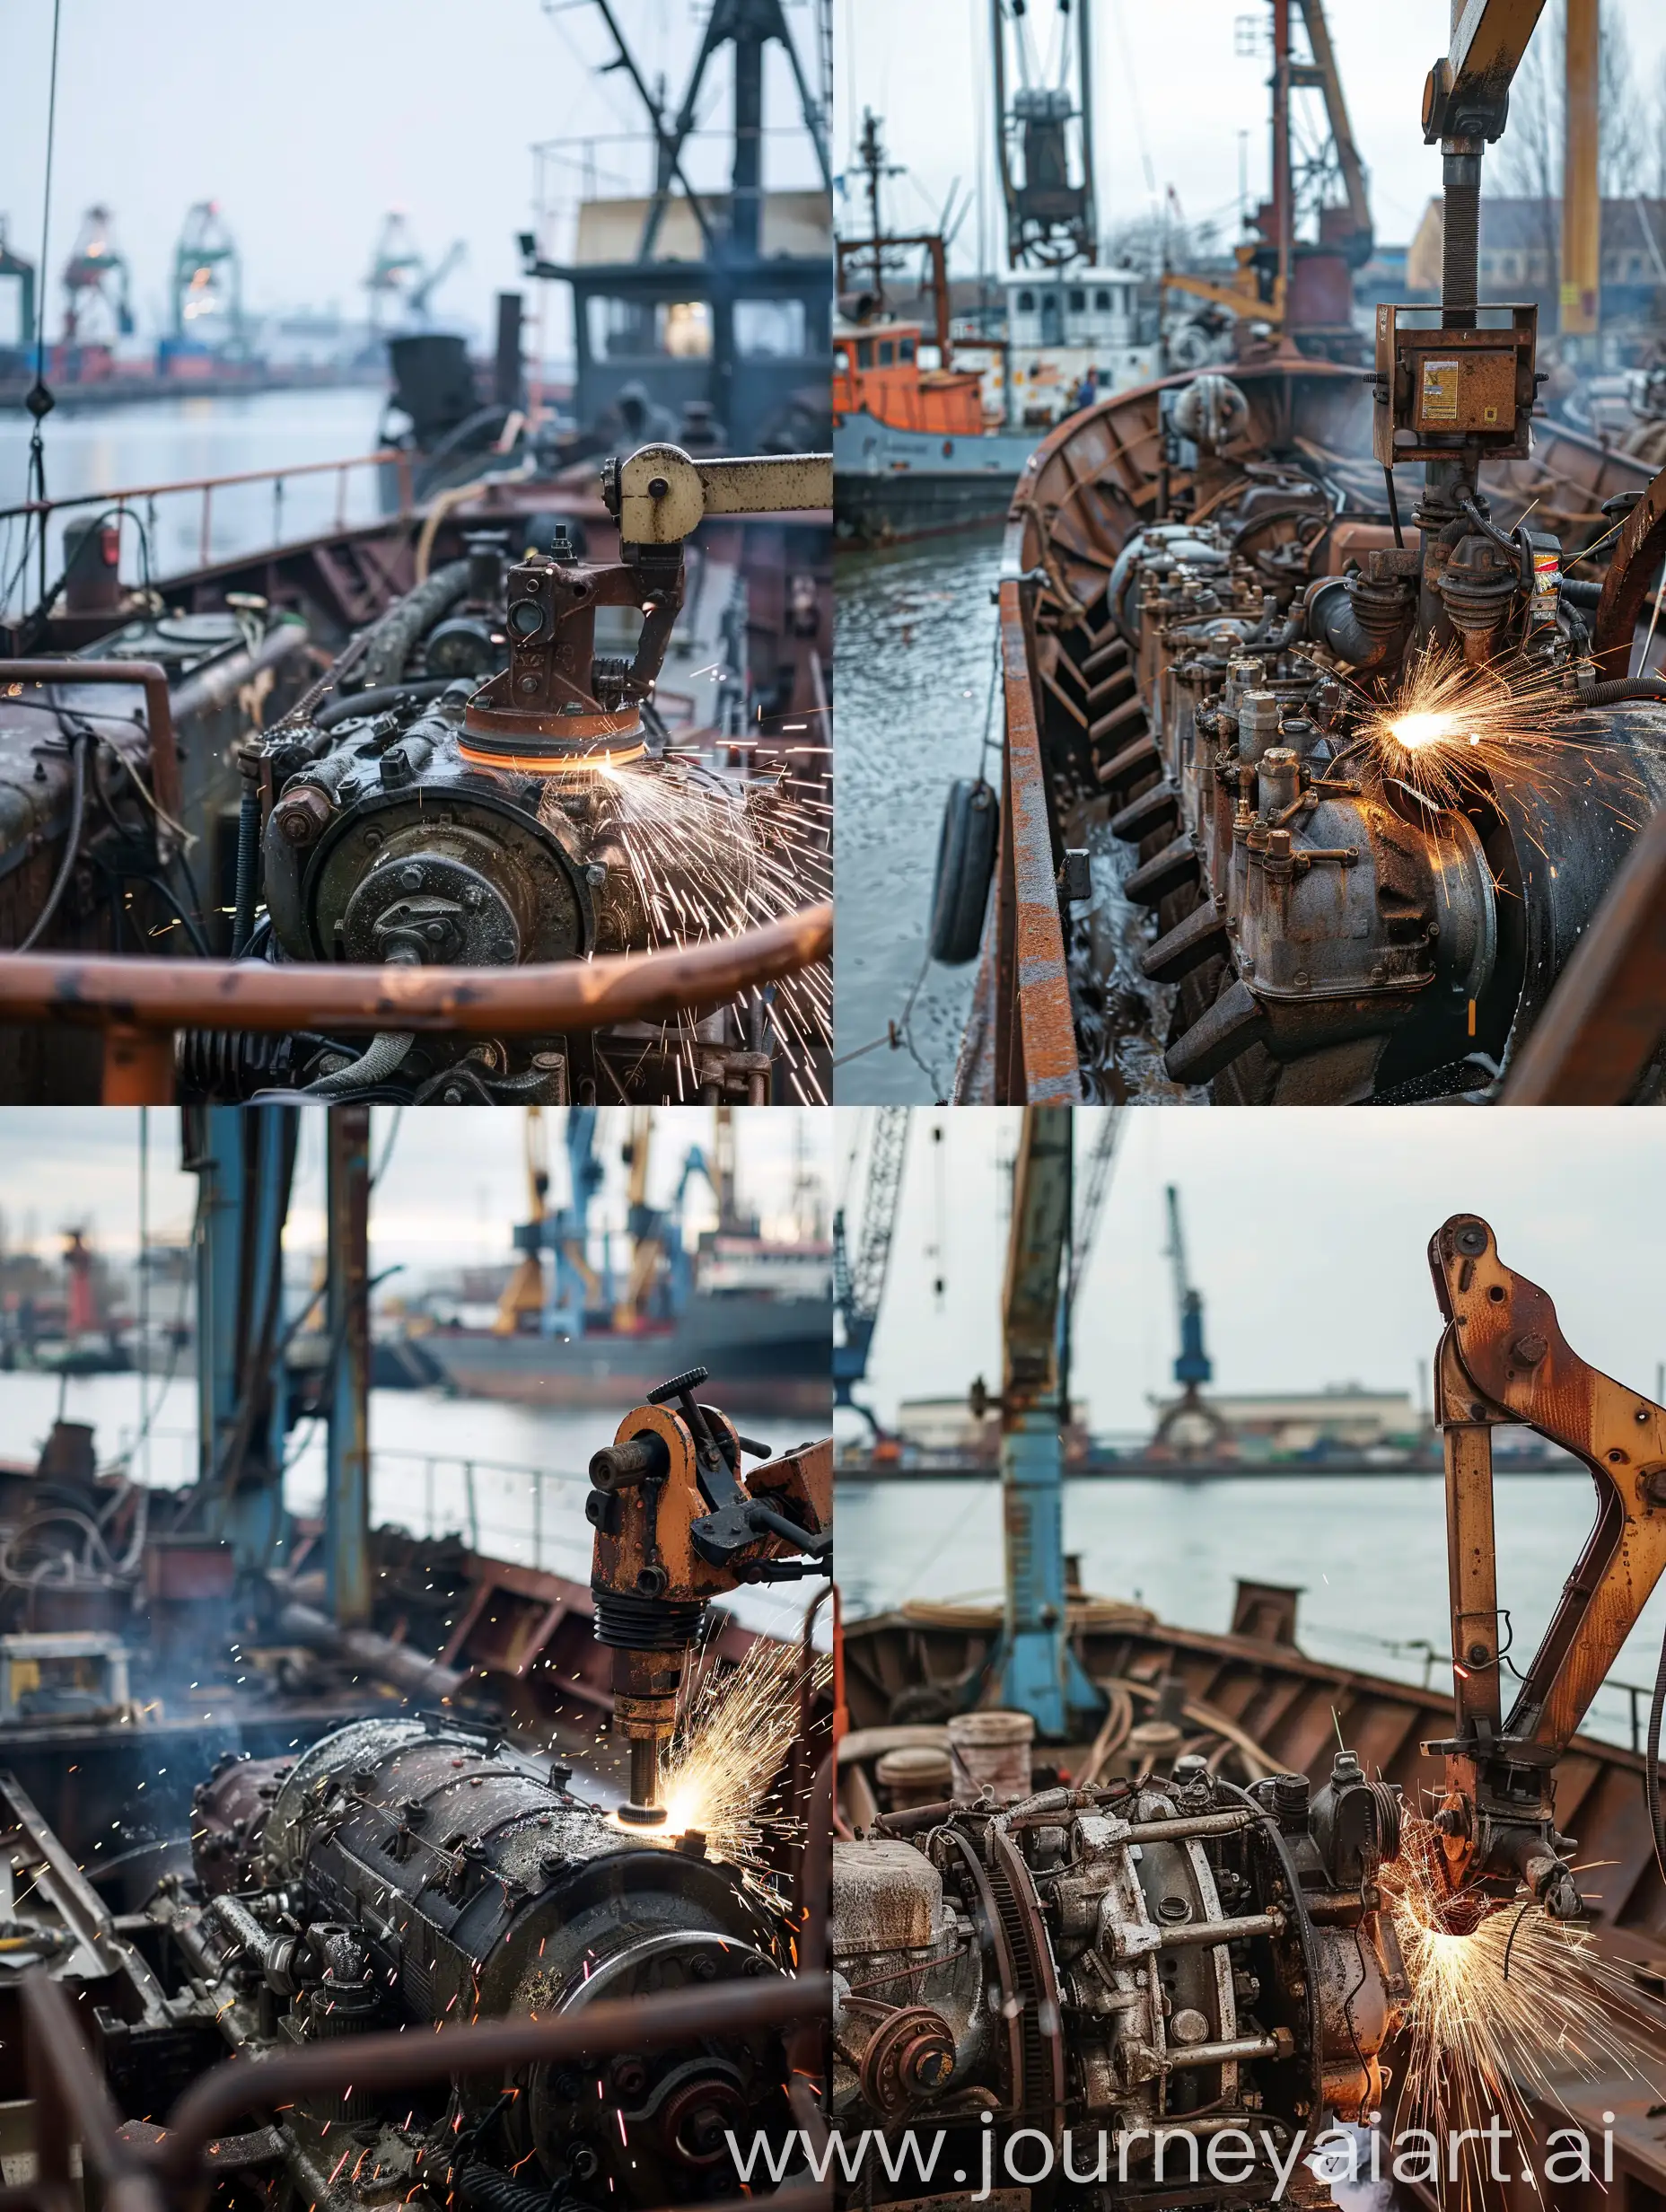 a machine polishes the diesel engine of an old ship, sparks are flying from the right corner, in the background there is a port without people